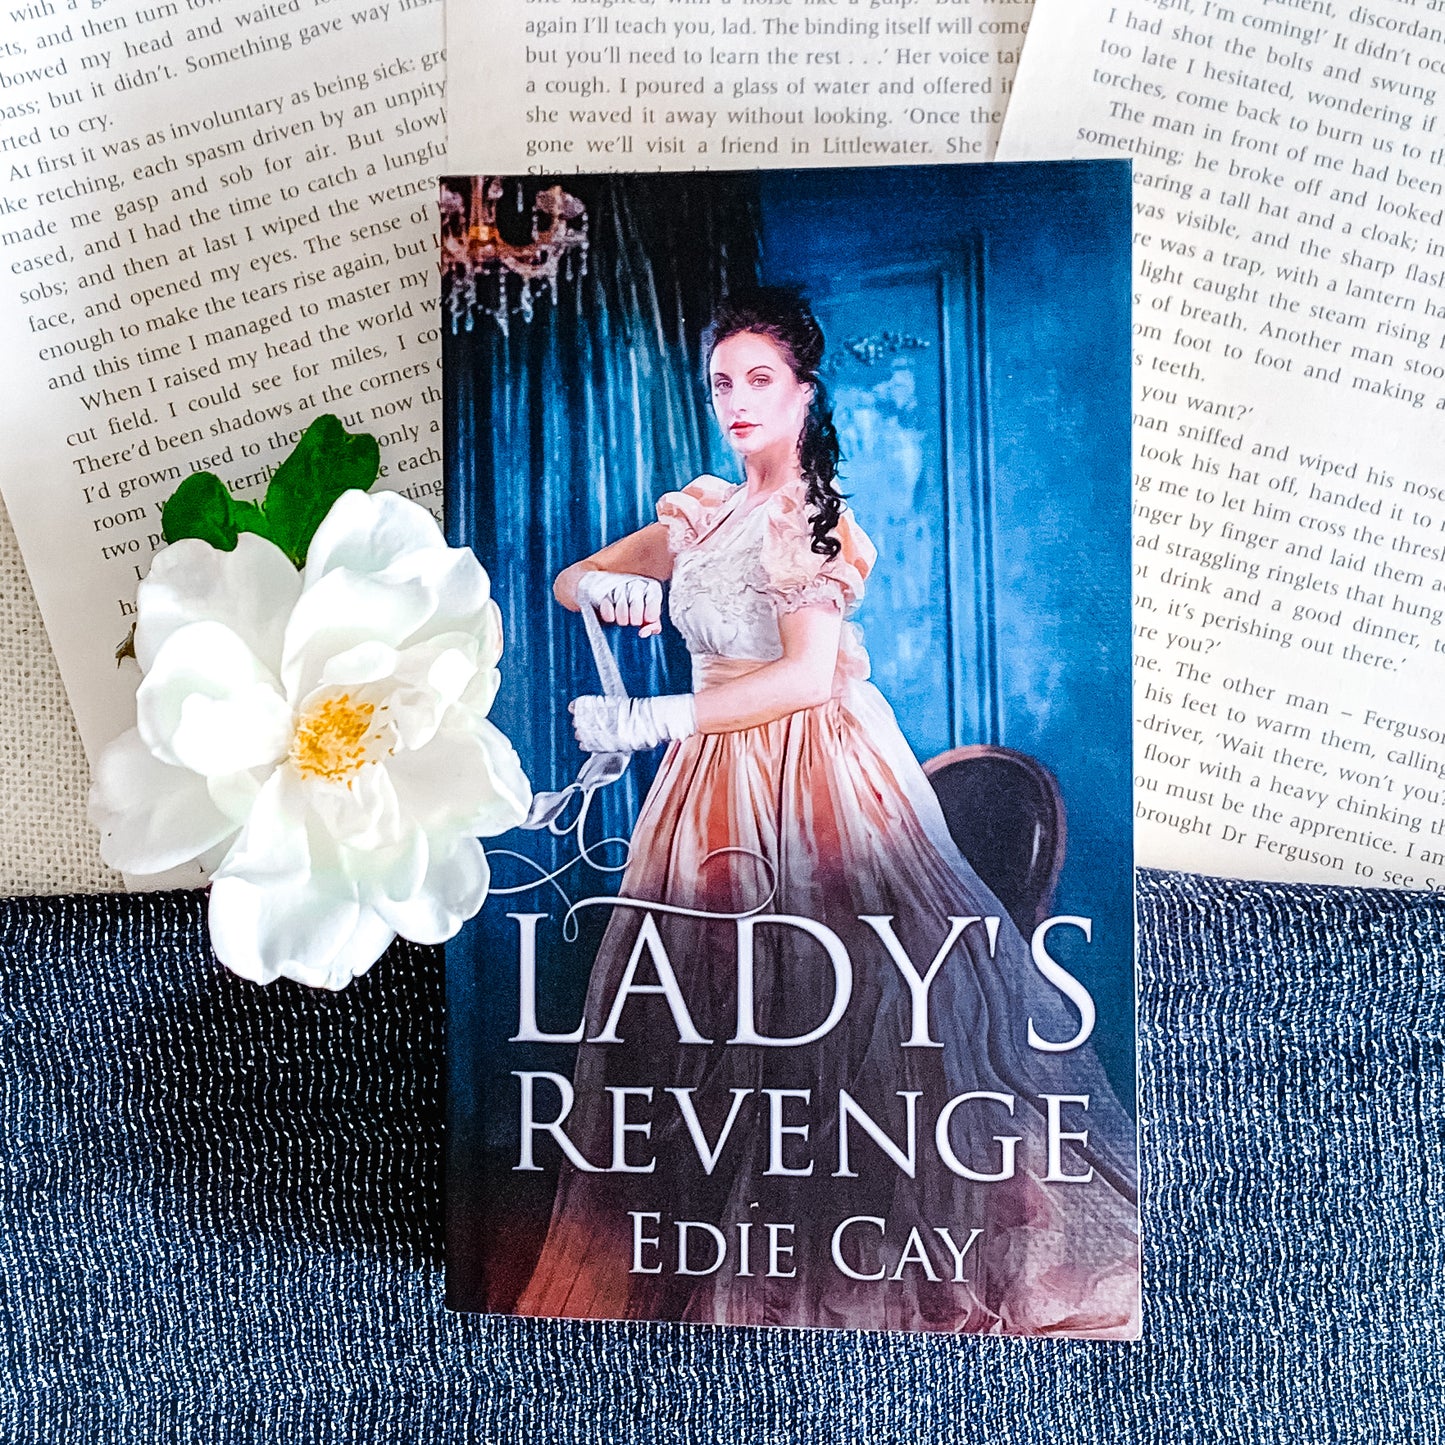 A Lady’s Revenge by Edie Cay